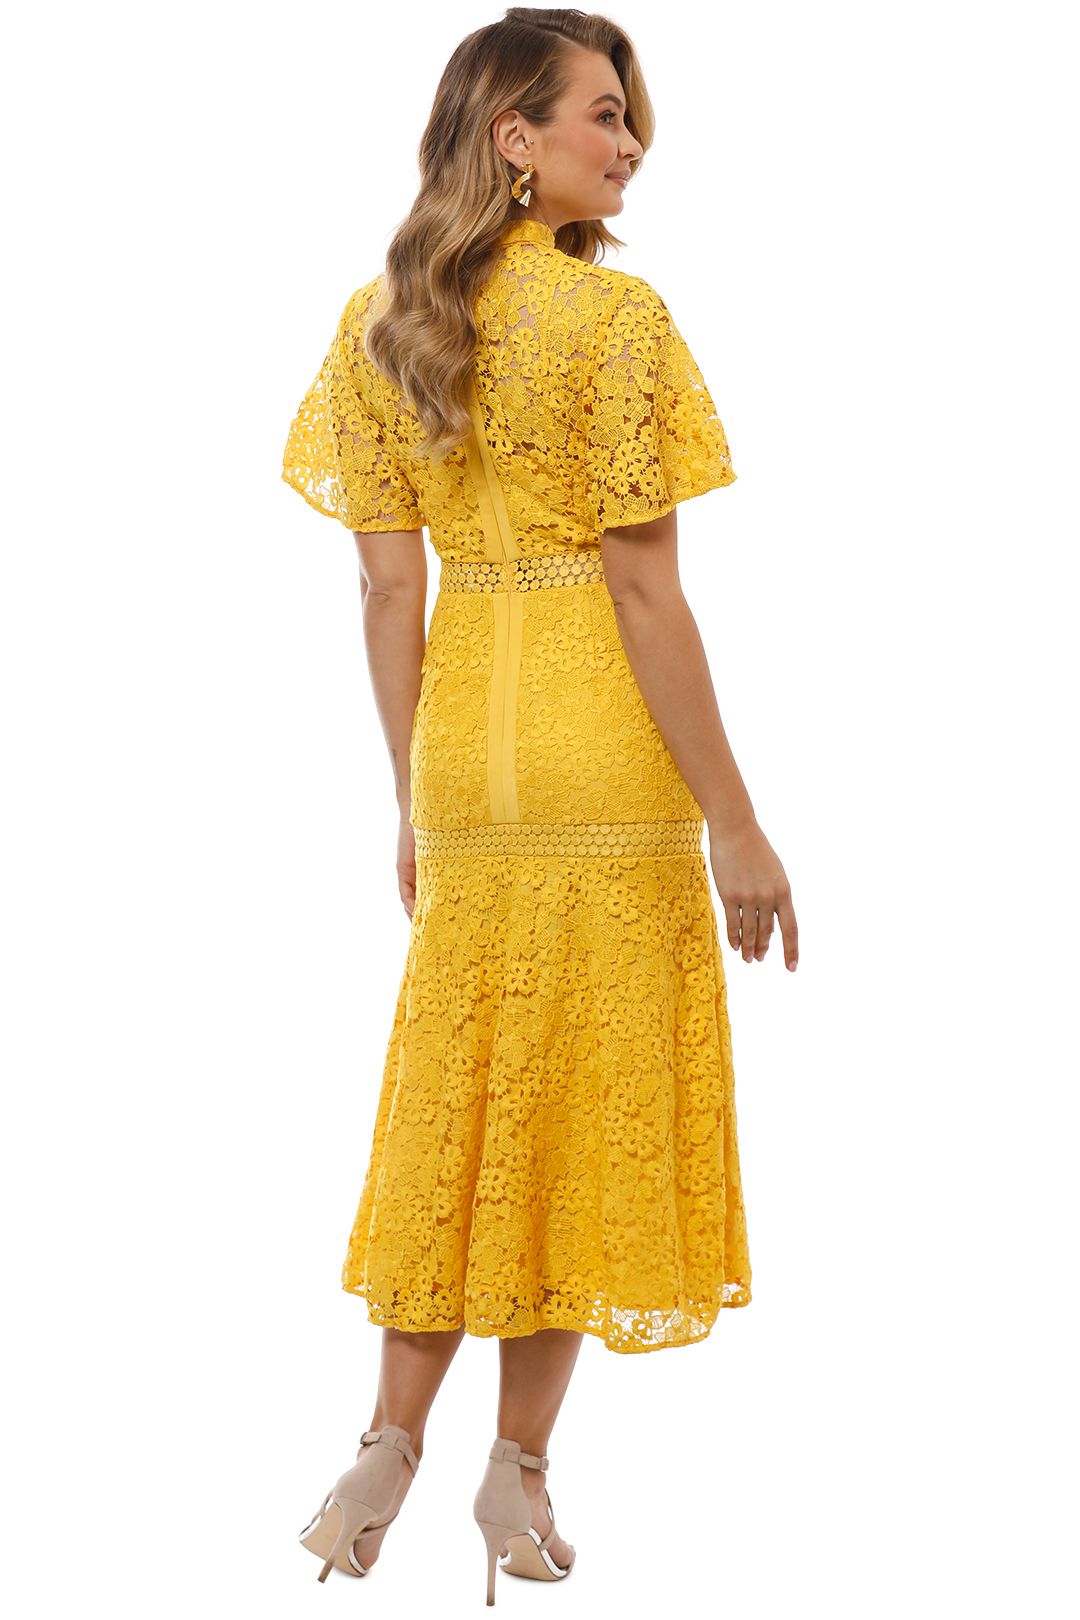 Utopia Lace Midi Dress by Keepsake the Label for Rent